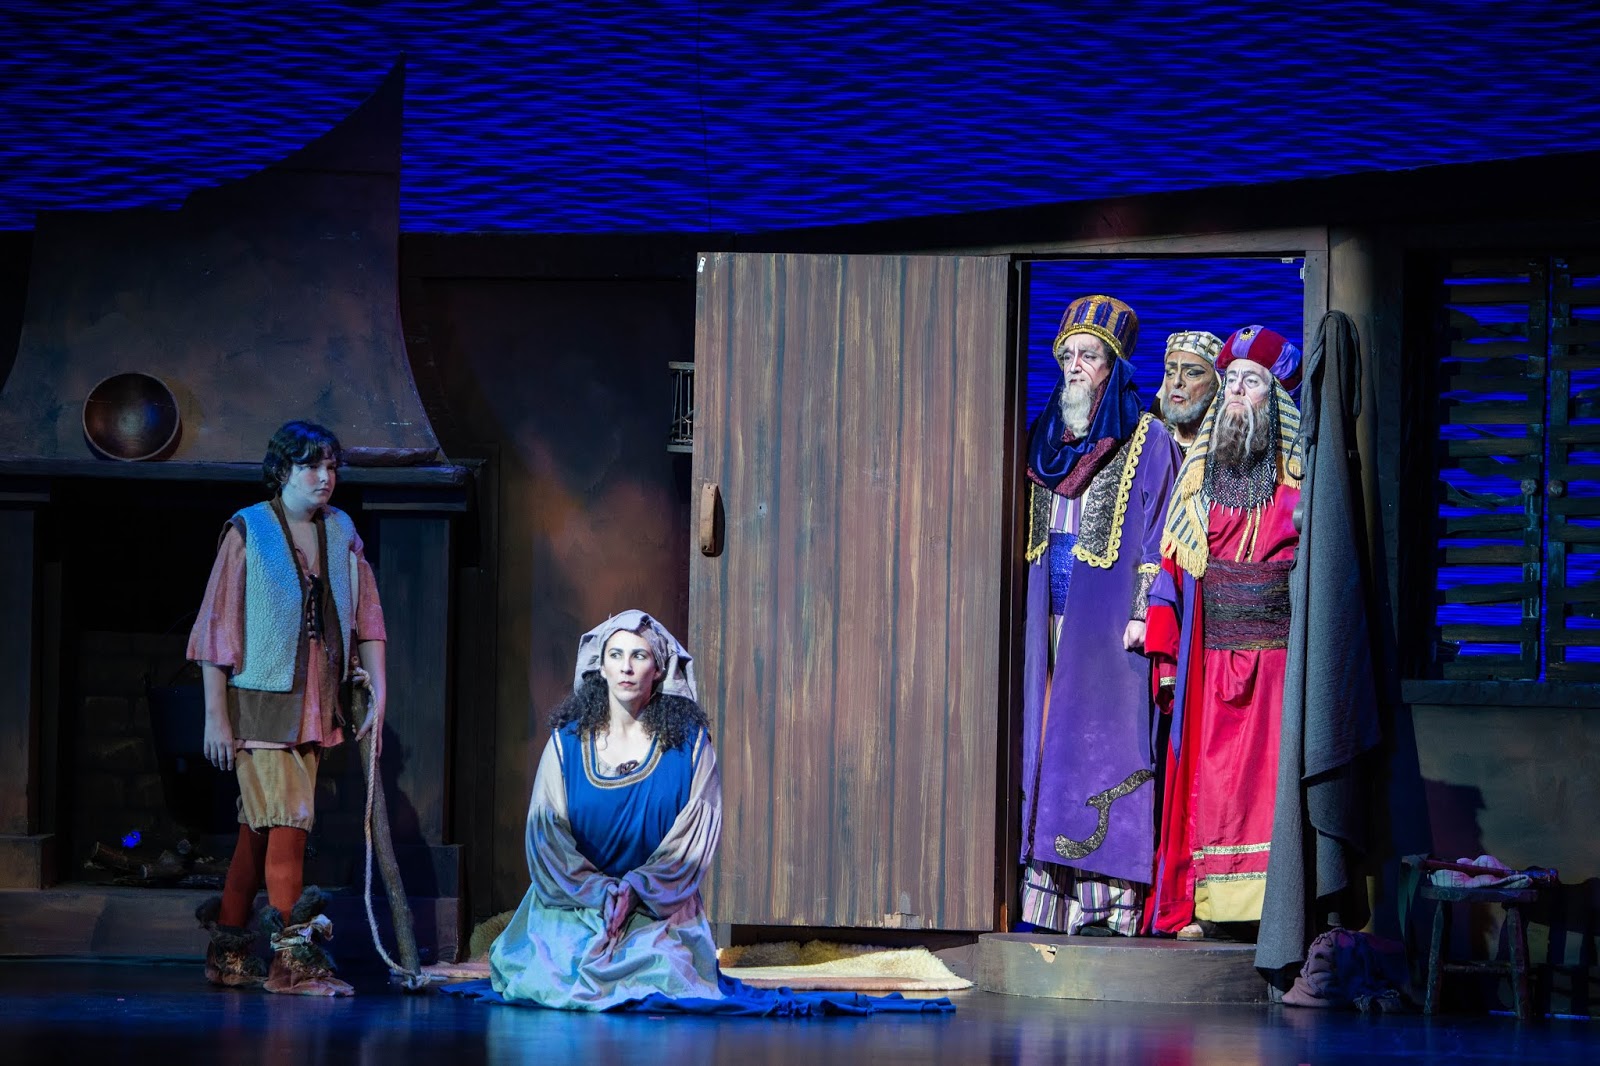 IN REVIEW: (from left to right) treble PHILLIP WEBB as Amahl, mezzo-soprano STEPHANIE FOLEY DAVIS as Mother, tenor JACOB RYAN WRIGHT as Kaspar, bass-baritone DONALD HARTMANN as Balthazar, and baritone ROBERT WELLS as Melchior in Greensboro Opera's December 2019 production of Gian Carlo Menotti's AMAHL AND THE NIGHT VISITORS [Photograph by VanderVeen Photographers, © by Greensboro Opera]